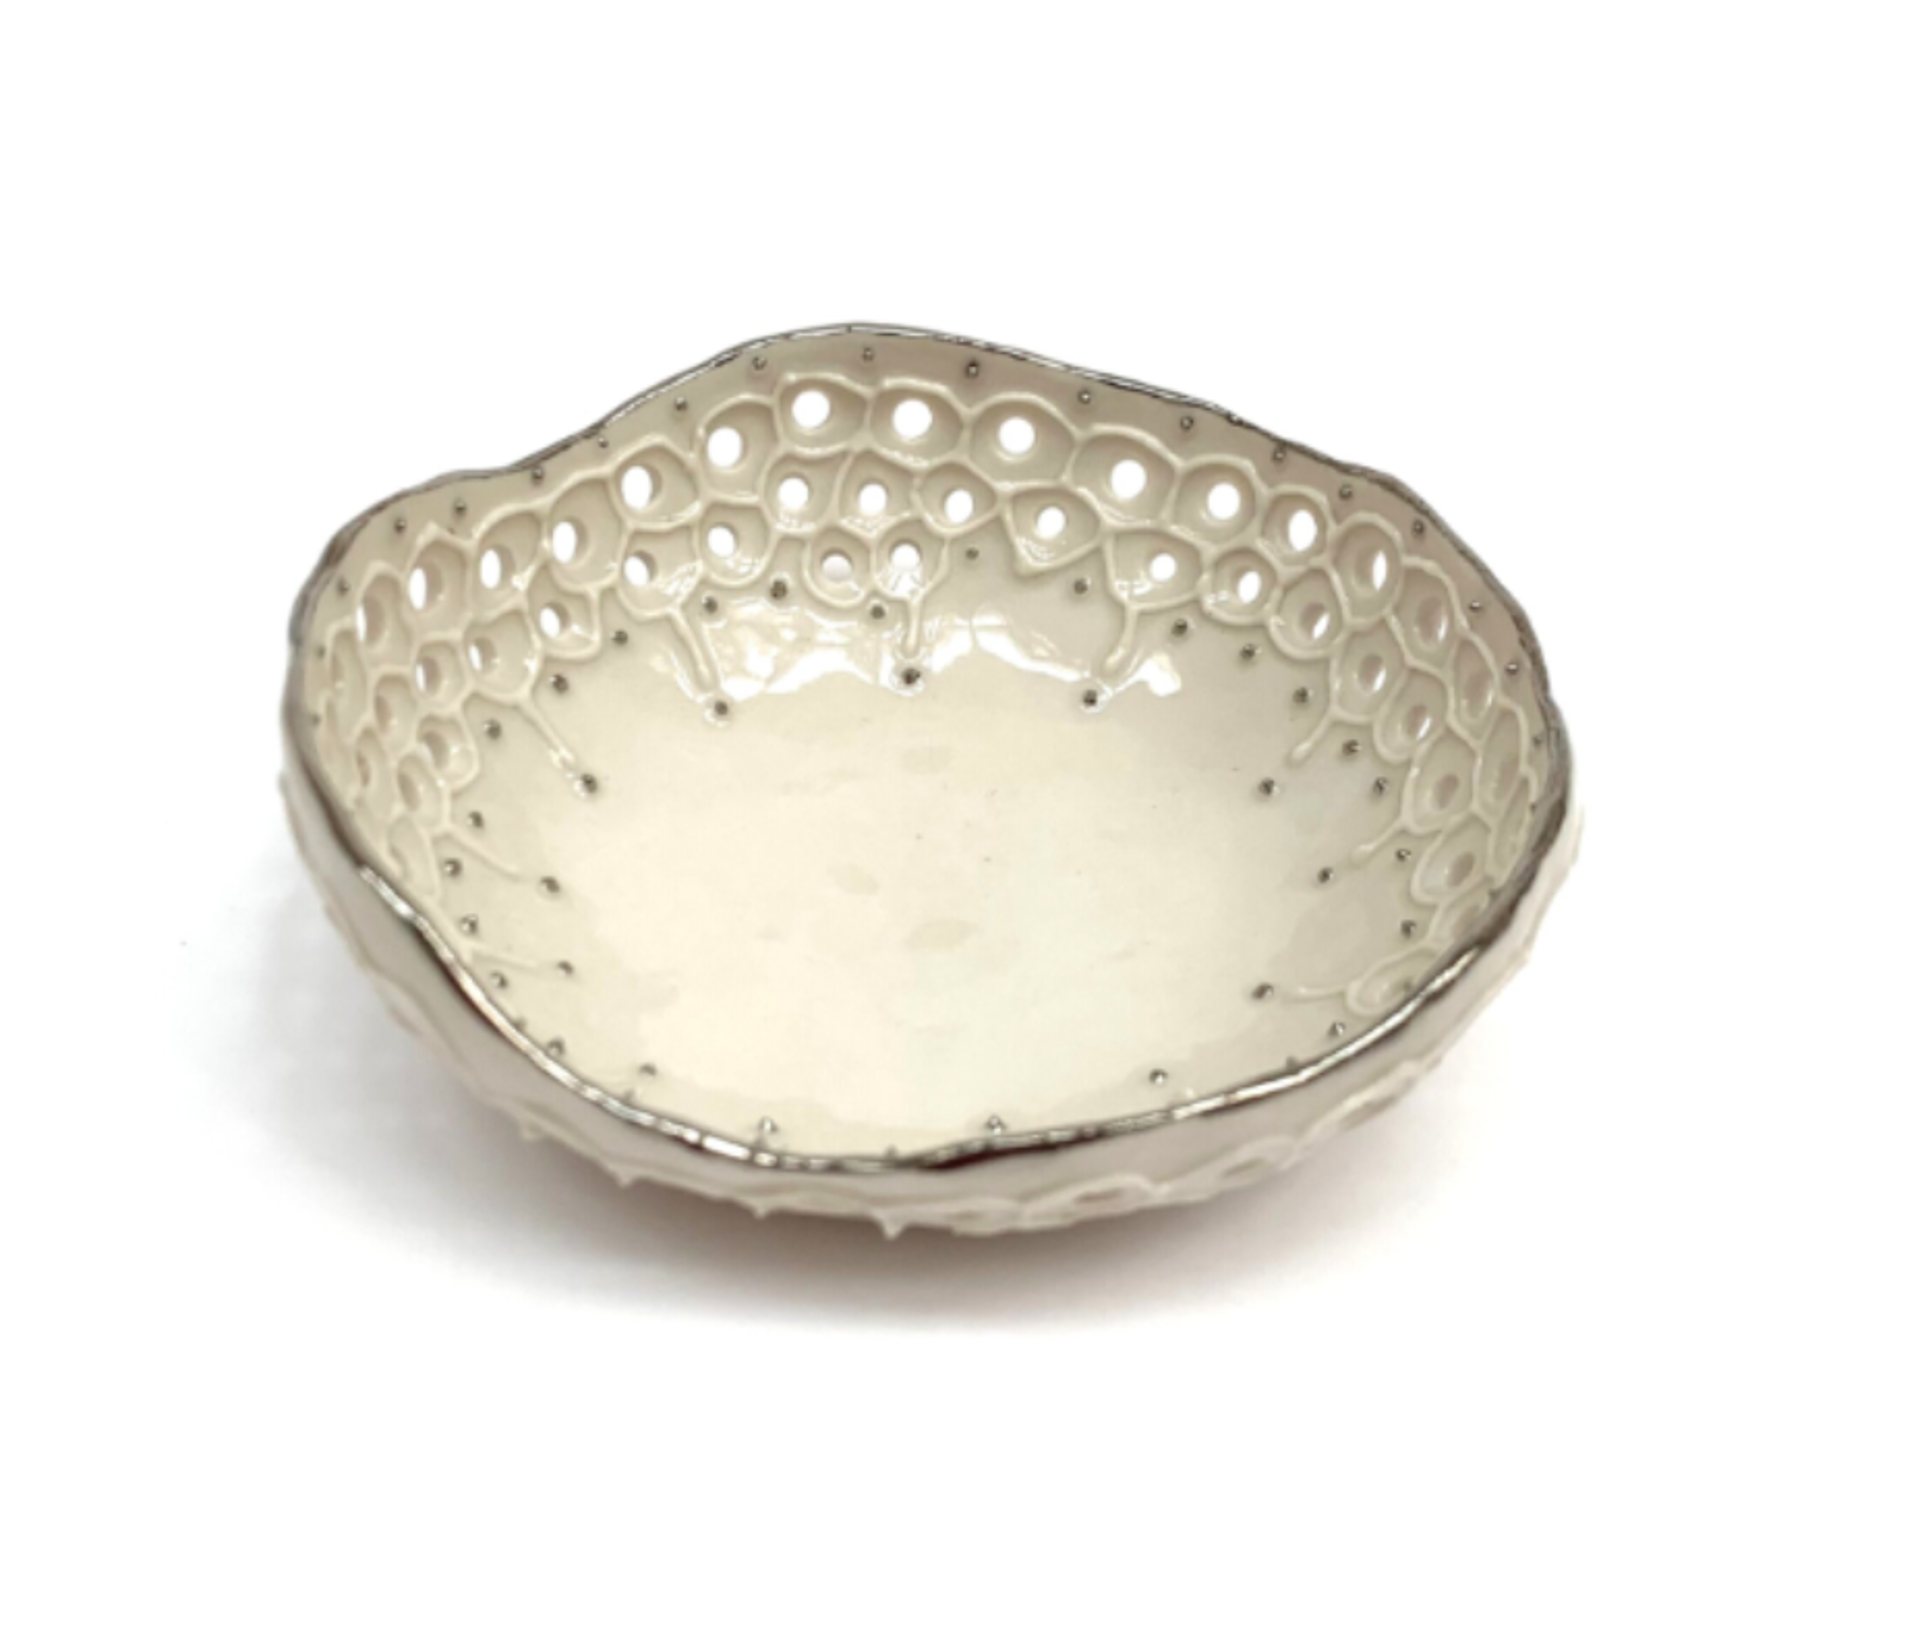 Small Lacy Silver Bowl (1) by Maria Bruckman